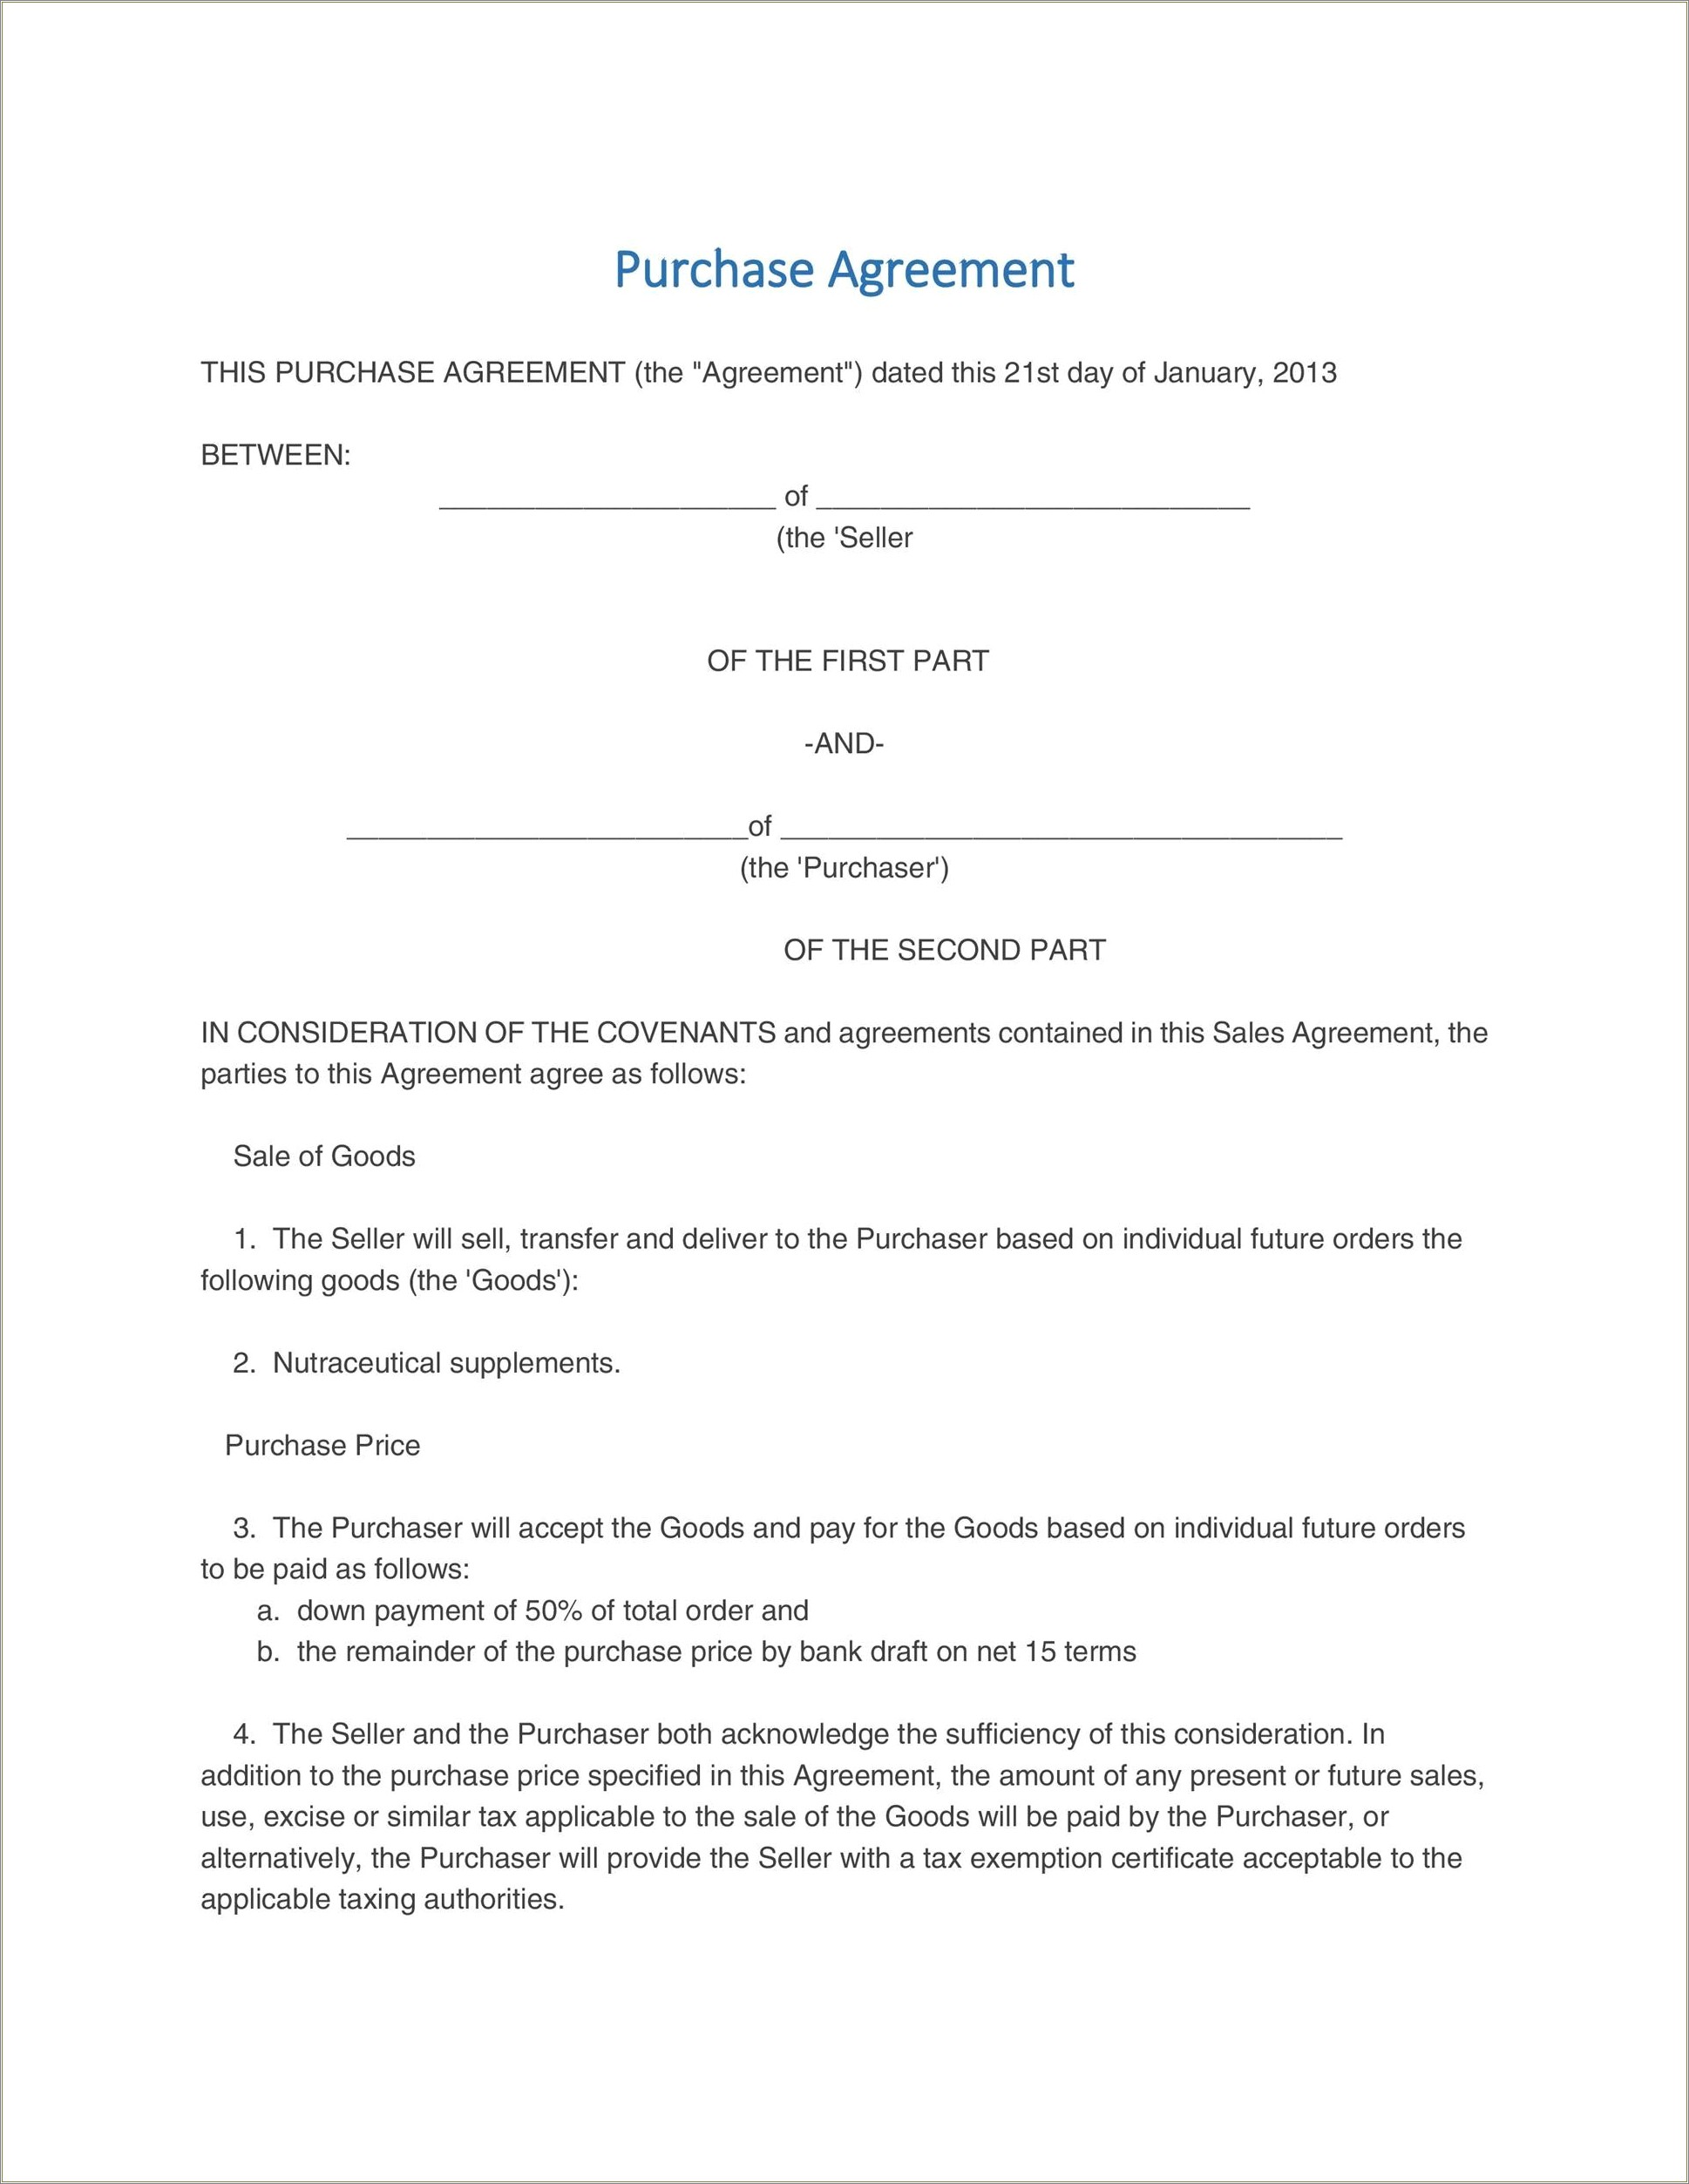 Free Real Estate Buy Sell Agreement Template